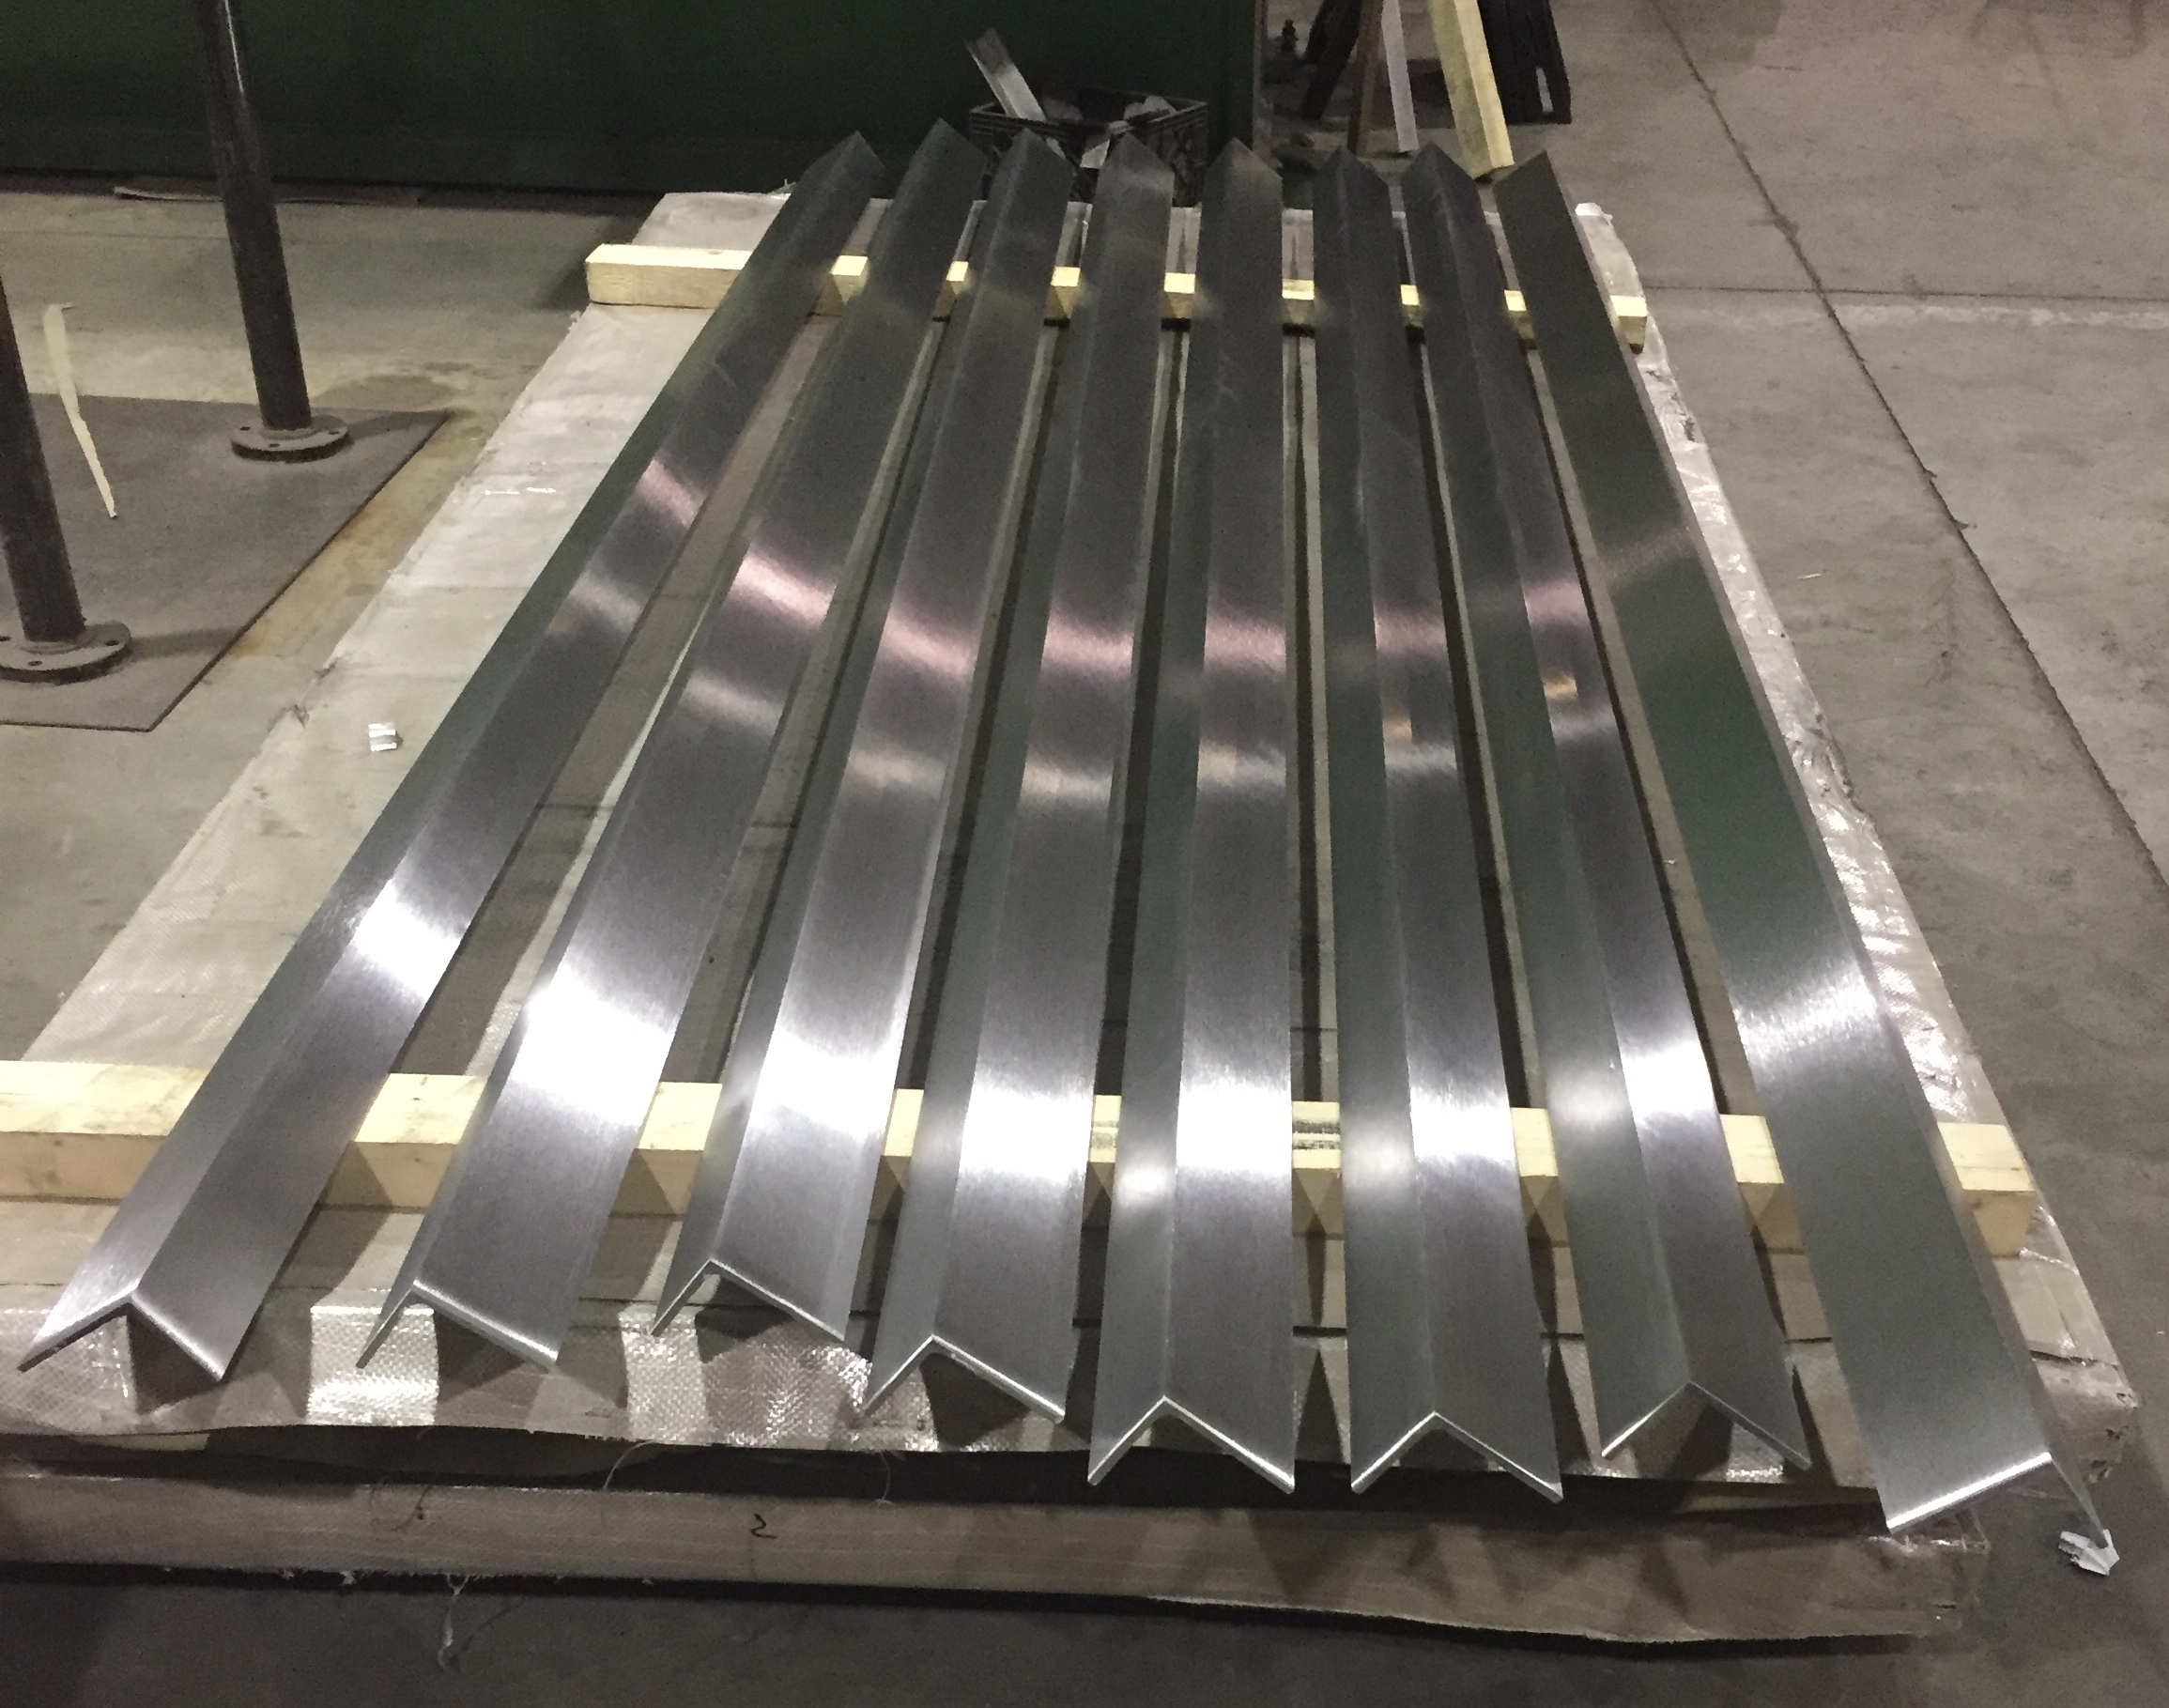 Polished stainless steel angles